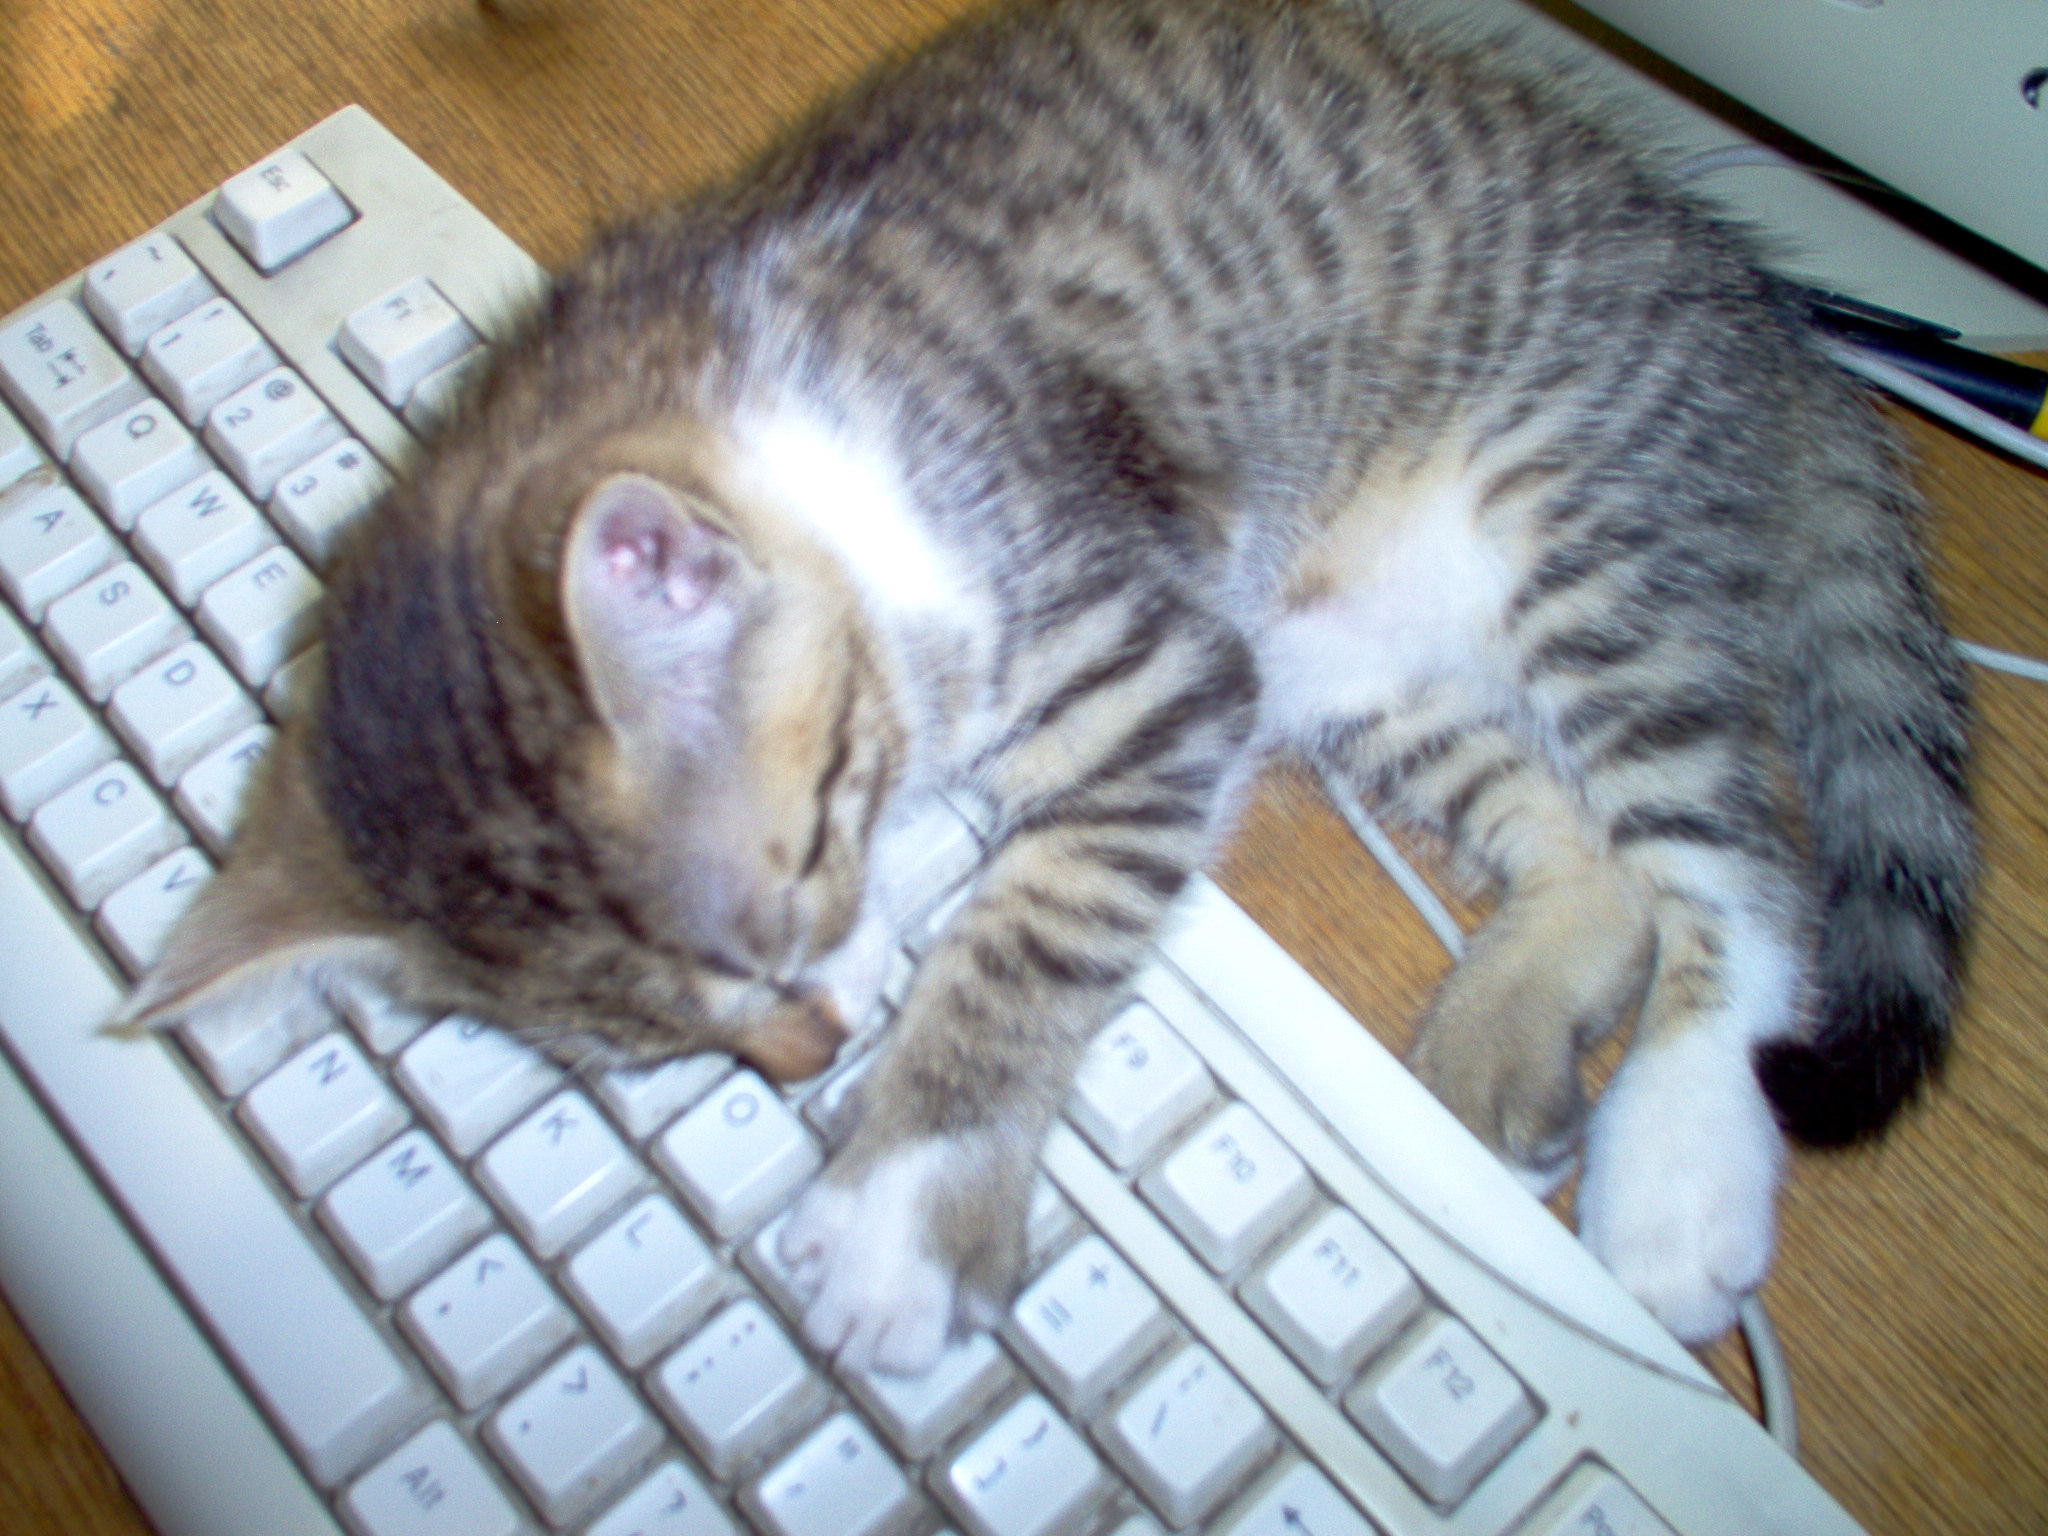 In case it was hard to return to work after the long holiday weekend, I give you a gratuitously cute image of a kitten on a keyboard. Think warm and fuzzy thoughts as you change your password. 